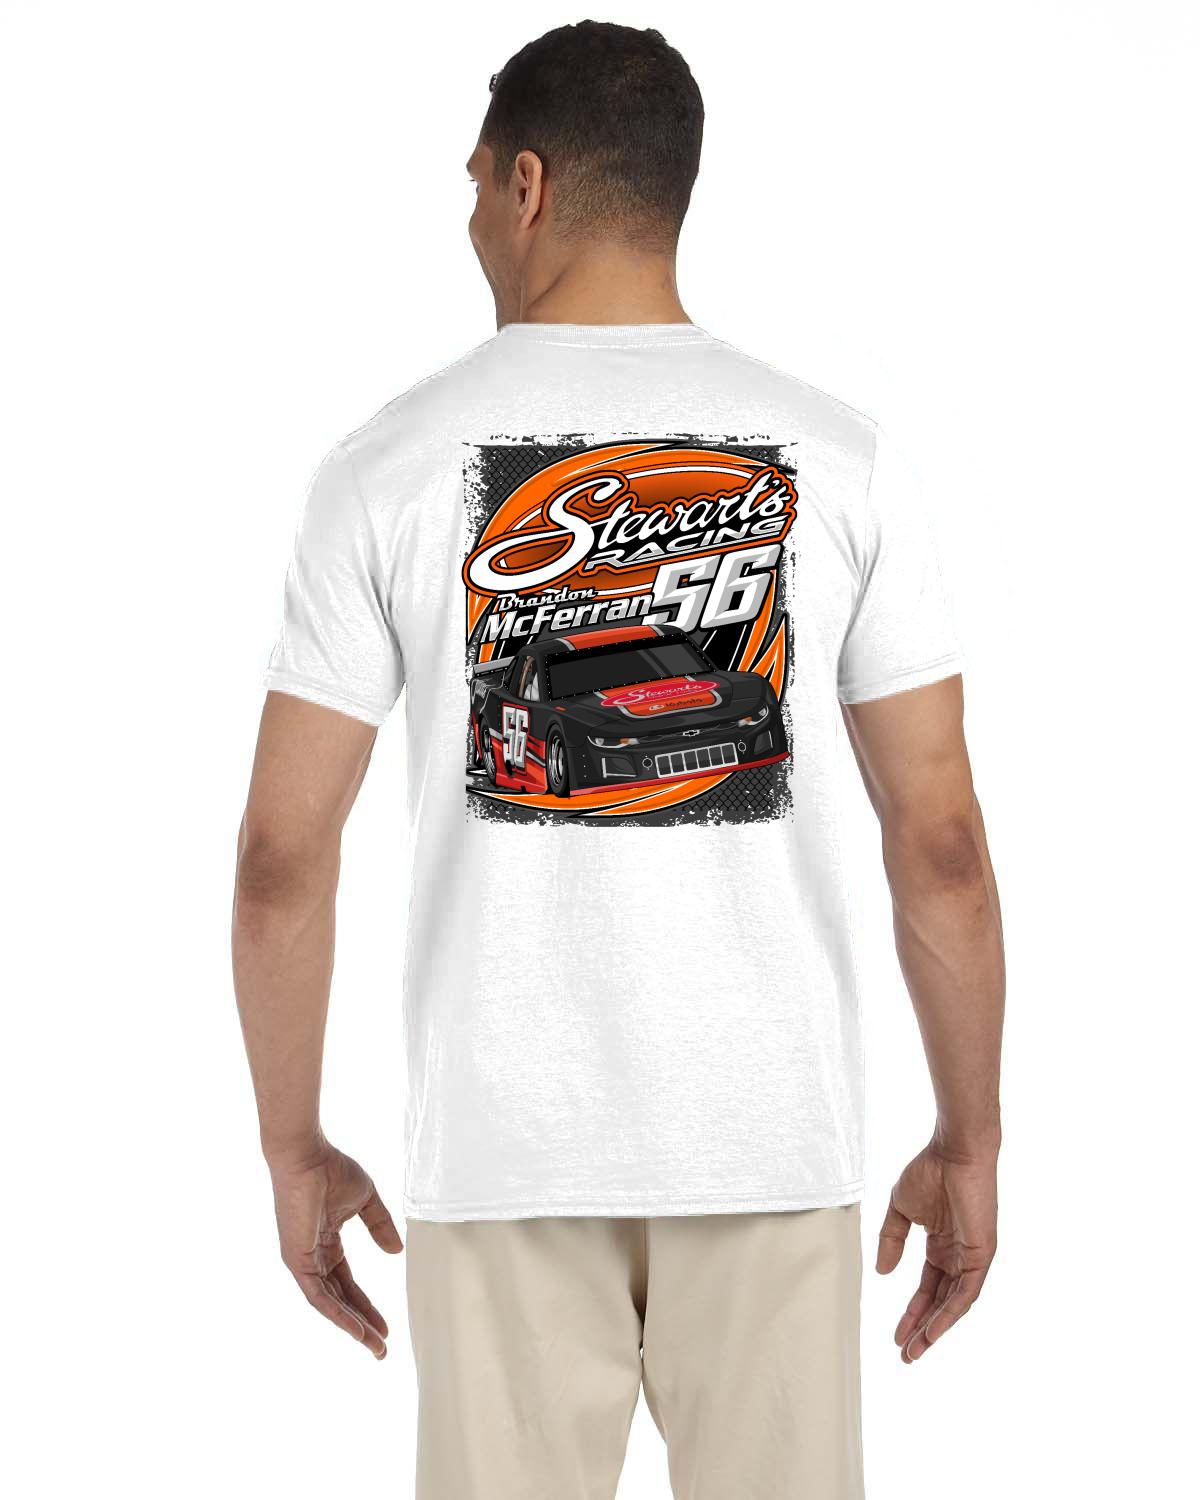 Stewart's Racing Soft Style Adult's Tshirt